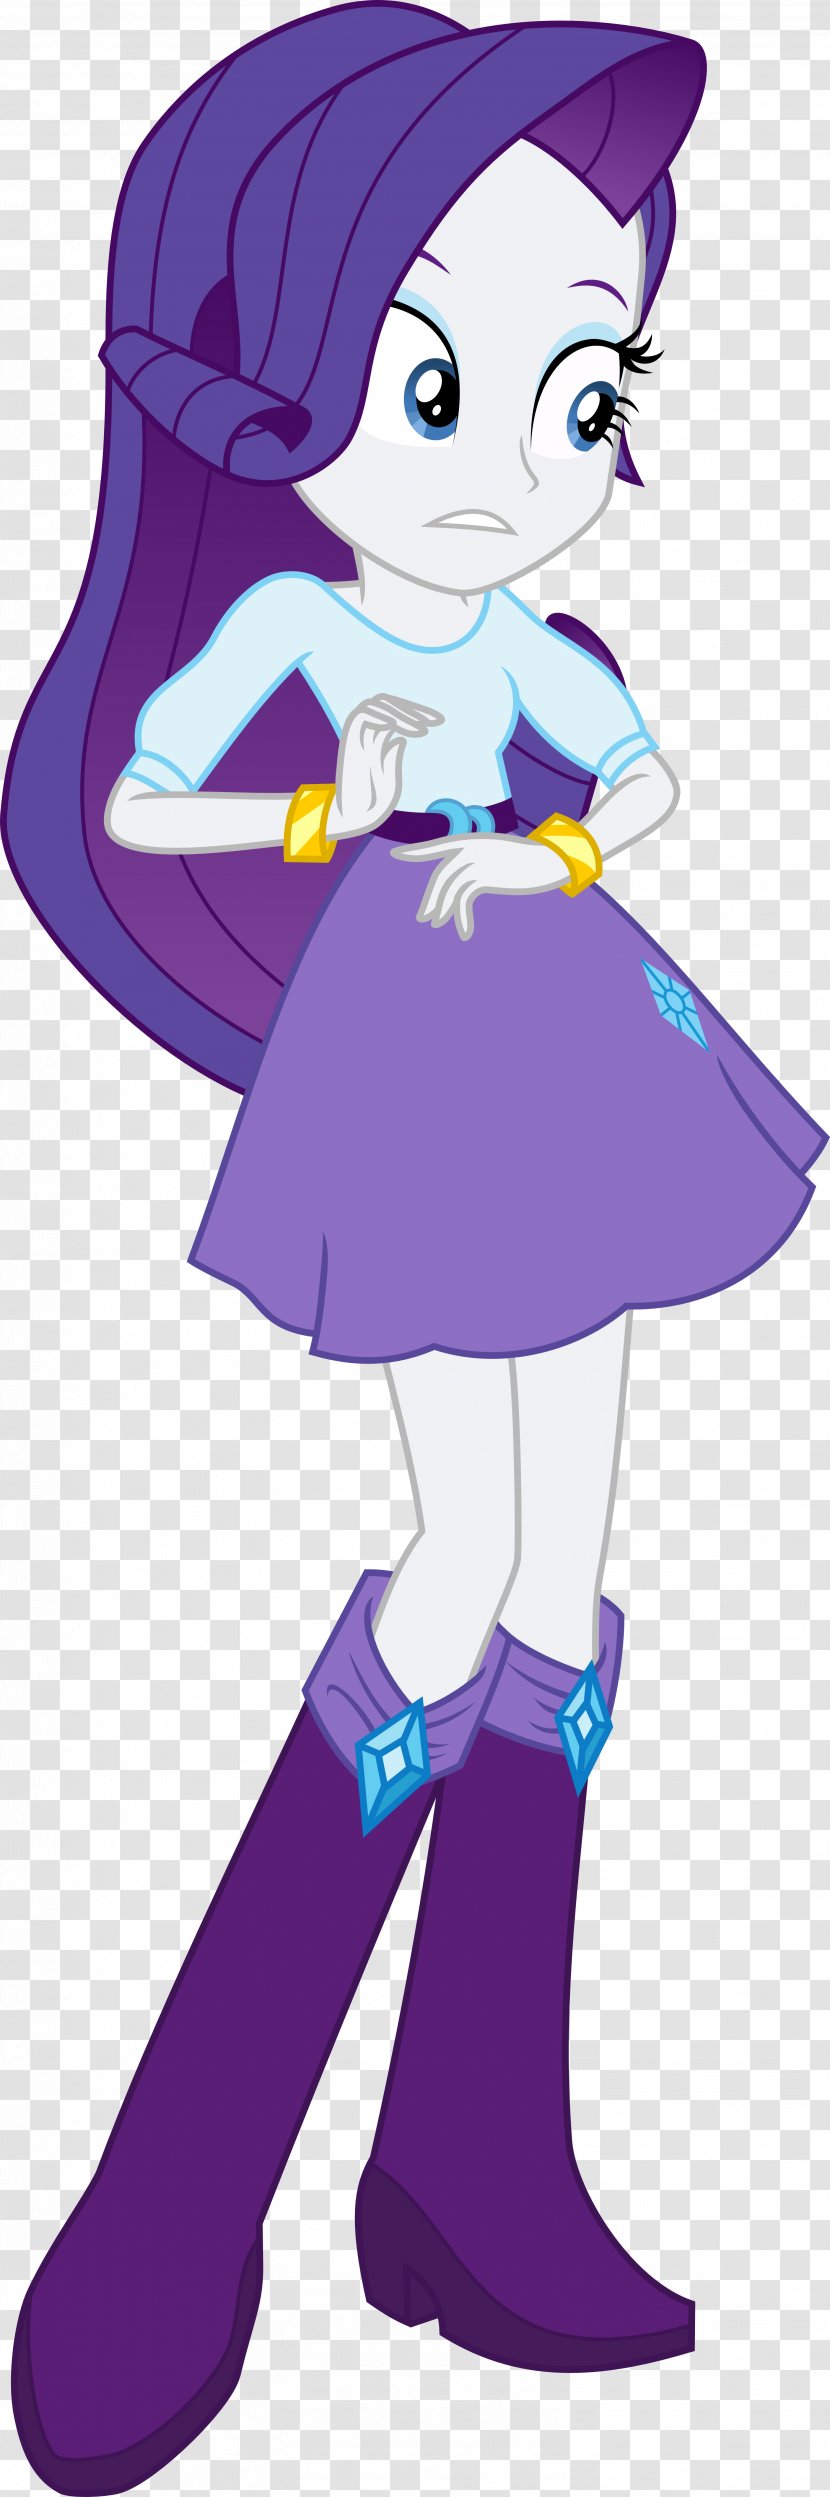 Rarity My Little Pony: Equestria Girls Art - Frame - Silhouette Transparent PNG